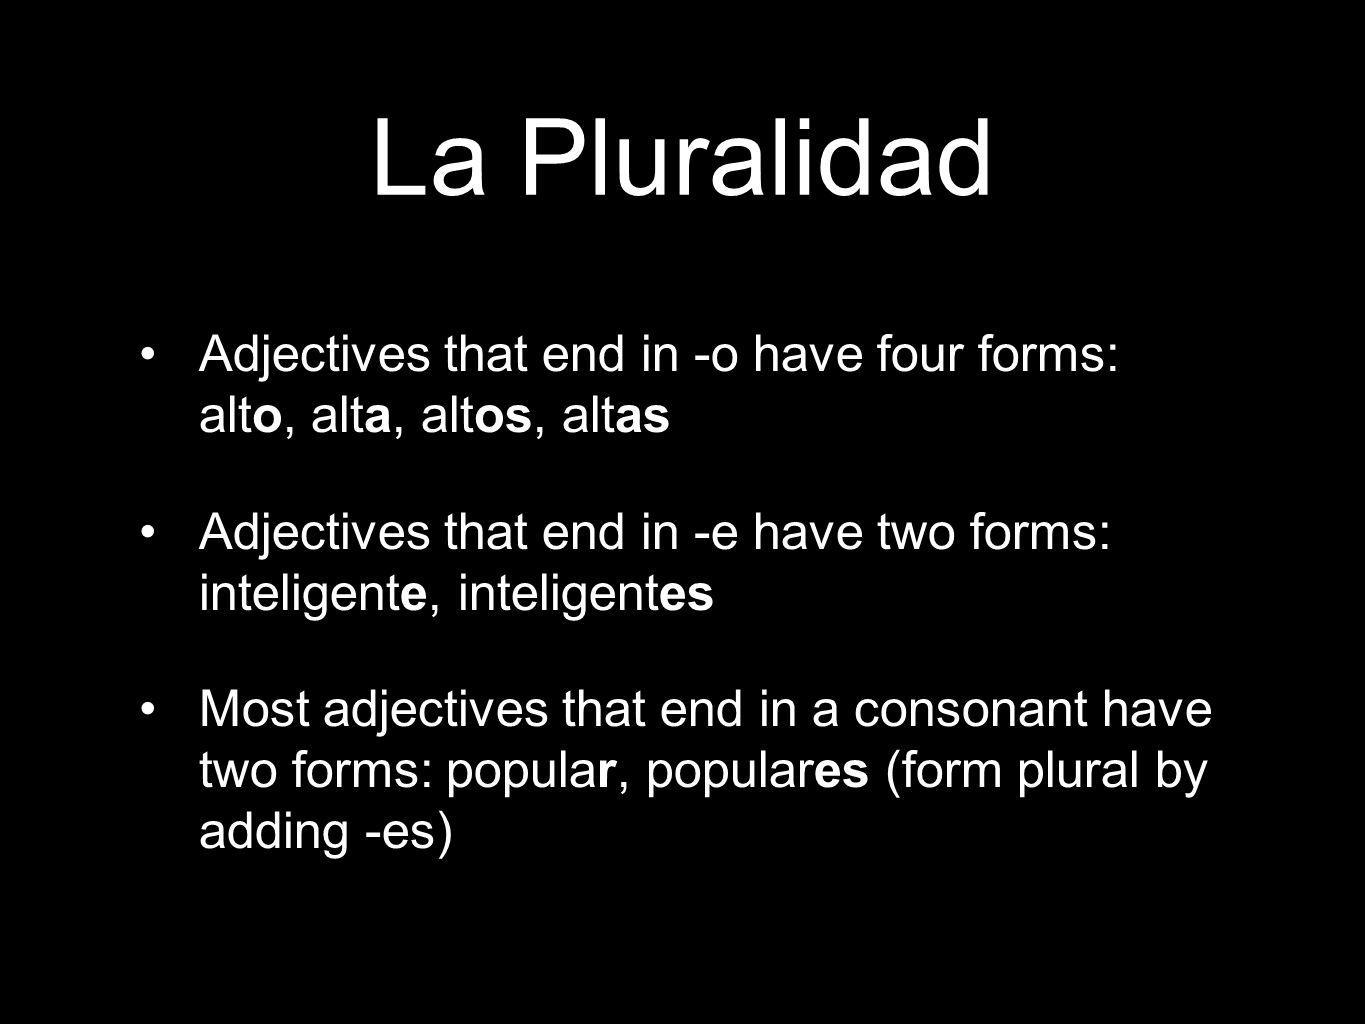 La Pluralidad Adjectives that end in -o have four forms: alto, alta, altos, altas Adjectives that end in -e have two forms: inteligente, inteligentes Most adjectives that end in a consonant have two forms: popular, populares (form plural by adding -es)